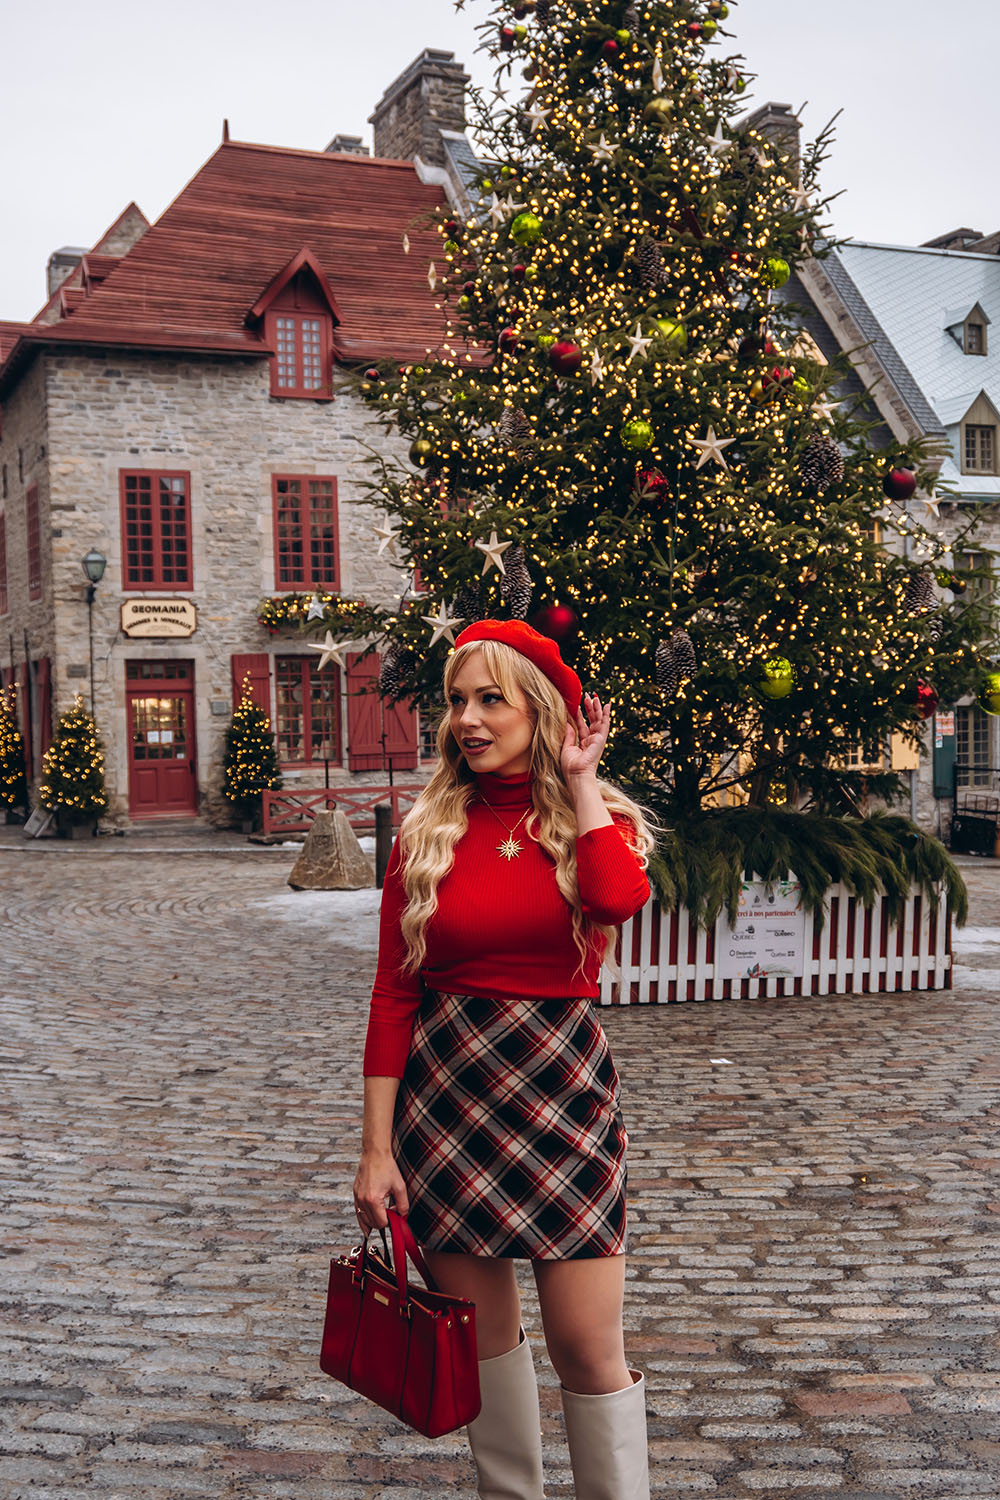 Quebec City at Christmas time is absolutely magical. In fact, it’s pretty safe to say it’s the most magical place to visit at Christmas time in all of Canada! If you’re planning a trip to Quebec City this winter you won’t want to miss this guide to the best things to do in Quebec City at Christmas time. This guide features everything from the top Quebec City activities and attractions, to the must see sights, best restaurants, festive events, and everything in between. Pictured here: Visit Place Royale